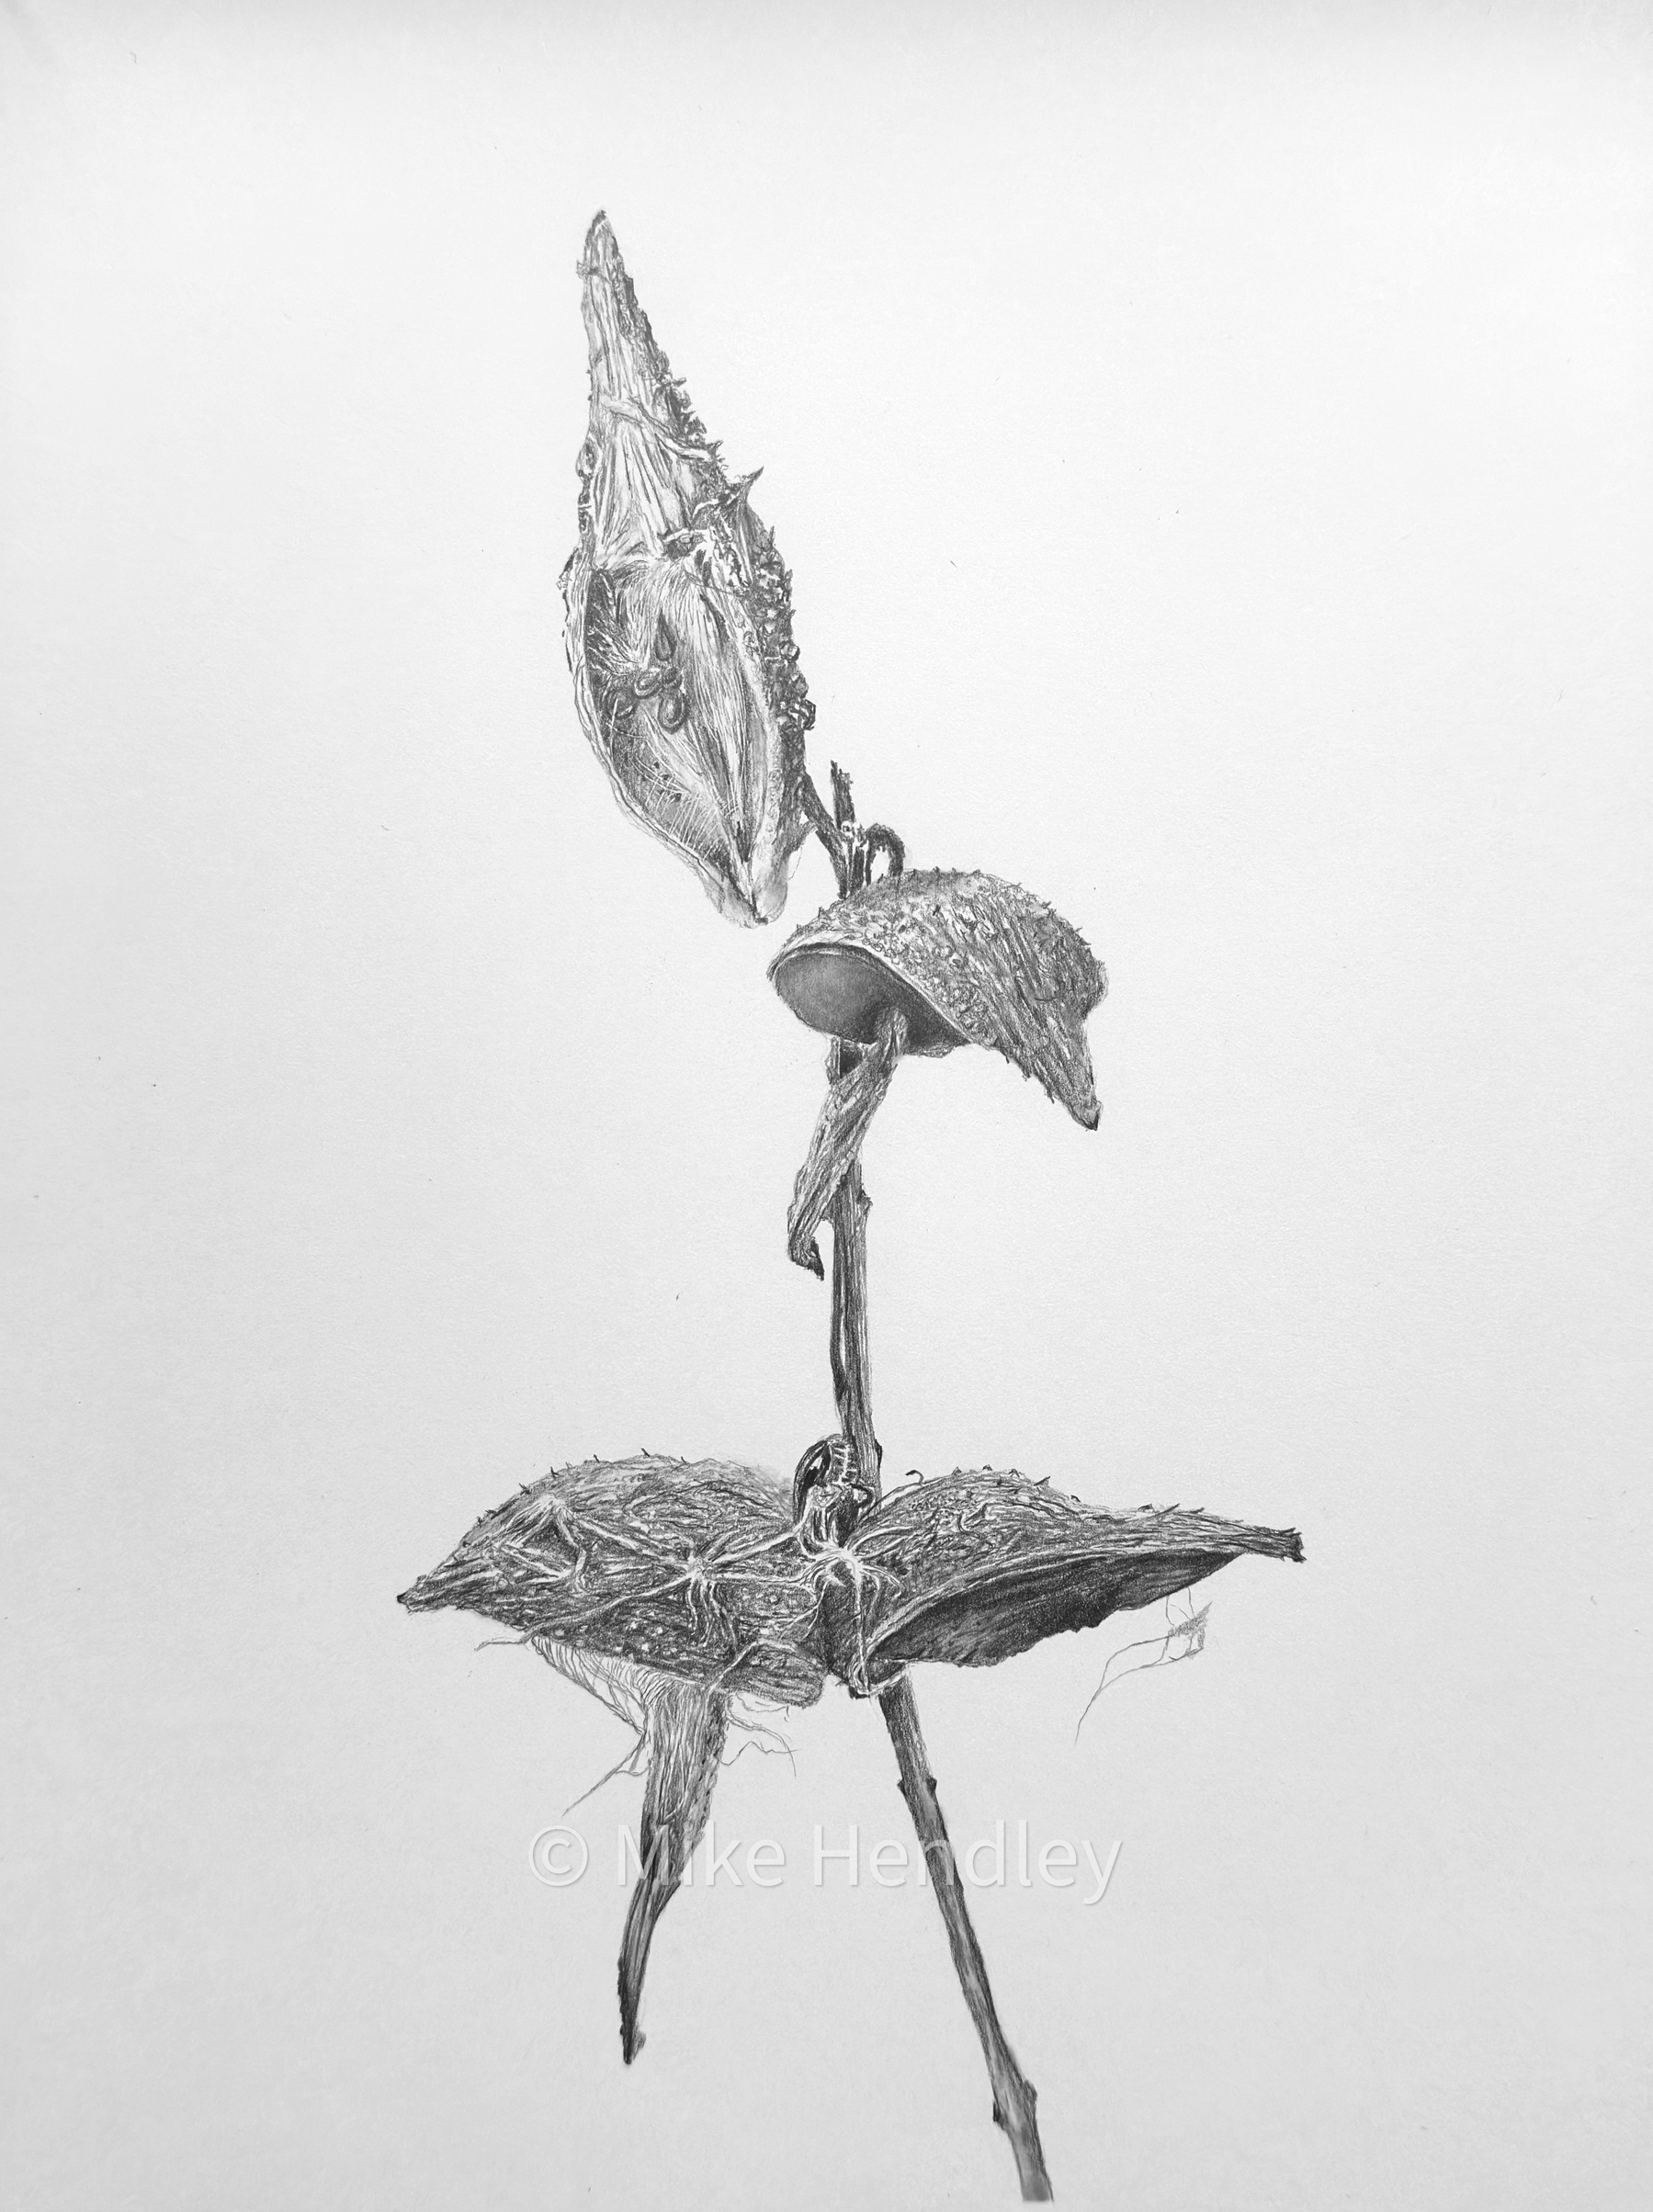 A detailed pencil drawing of a milkweed plant in winter, showcasing its textured pods and leaves with a subtle phallic resemblance, set against a plain background.